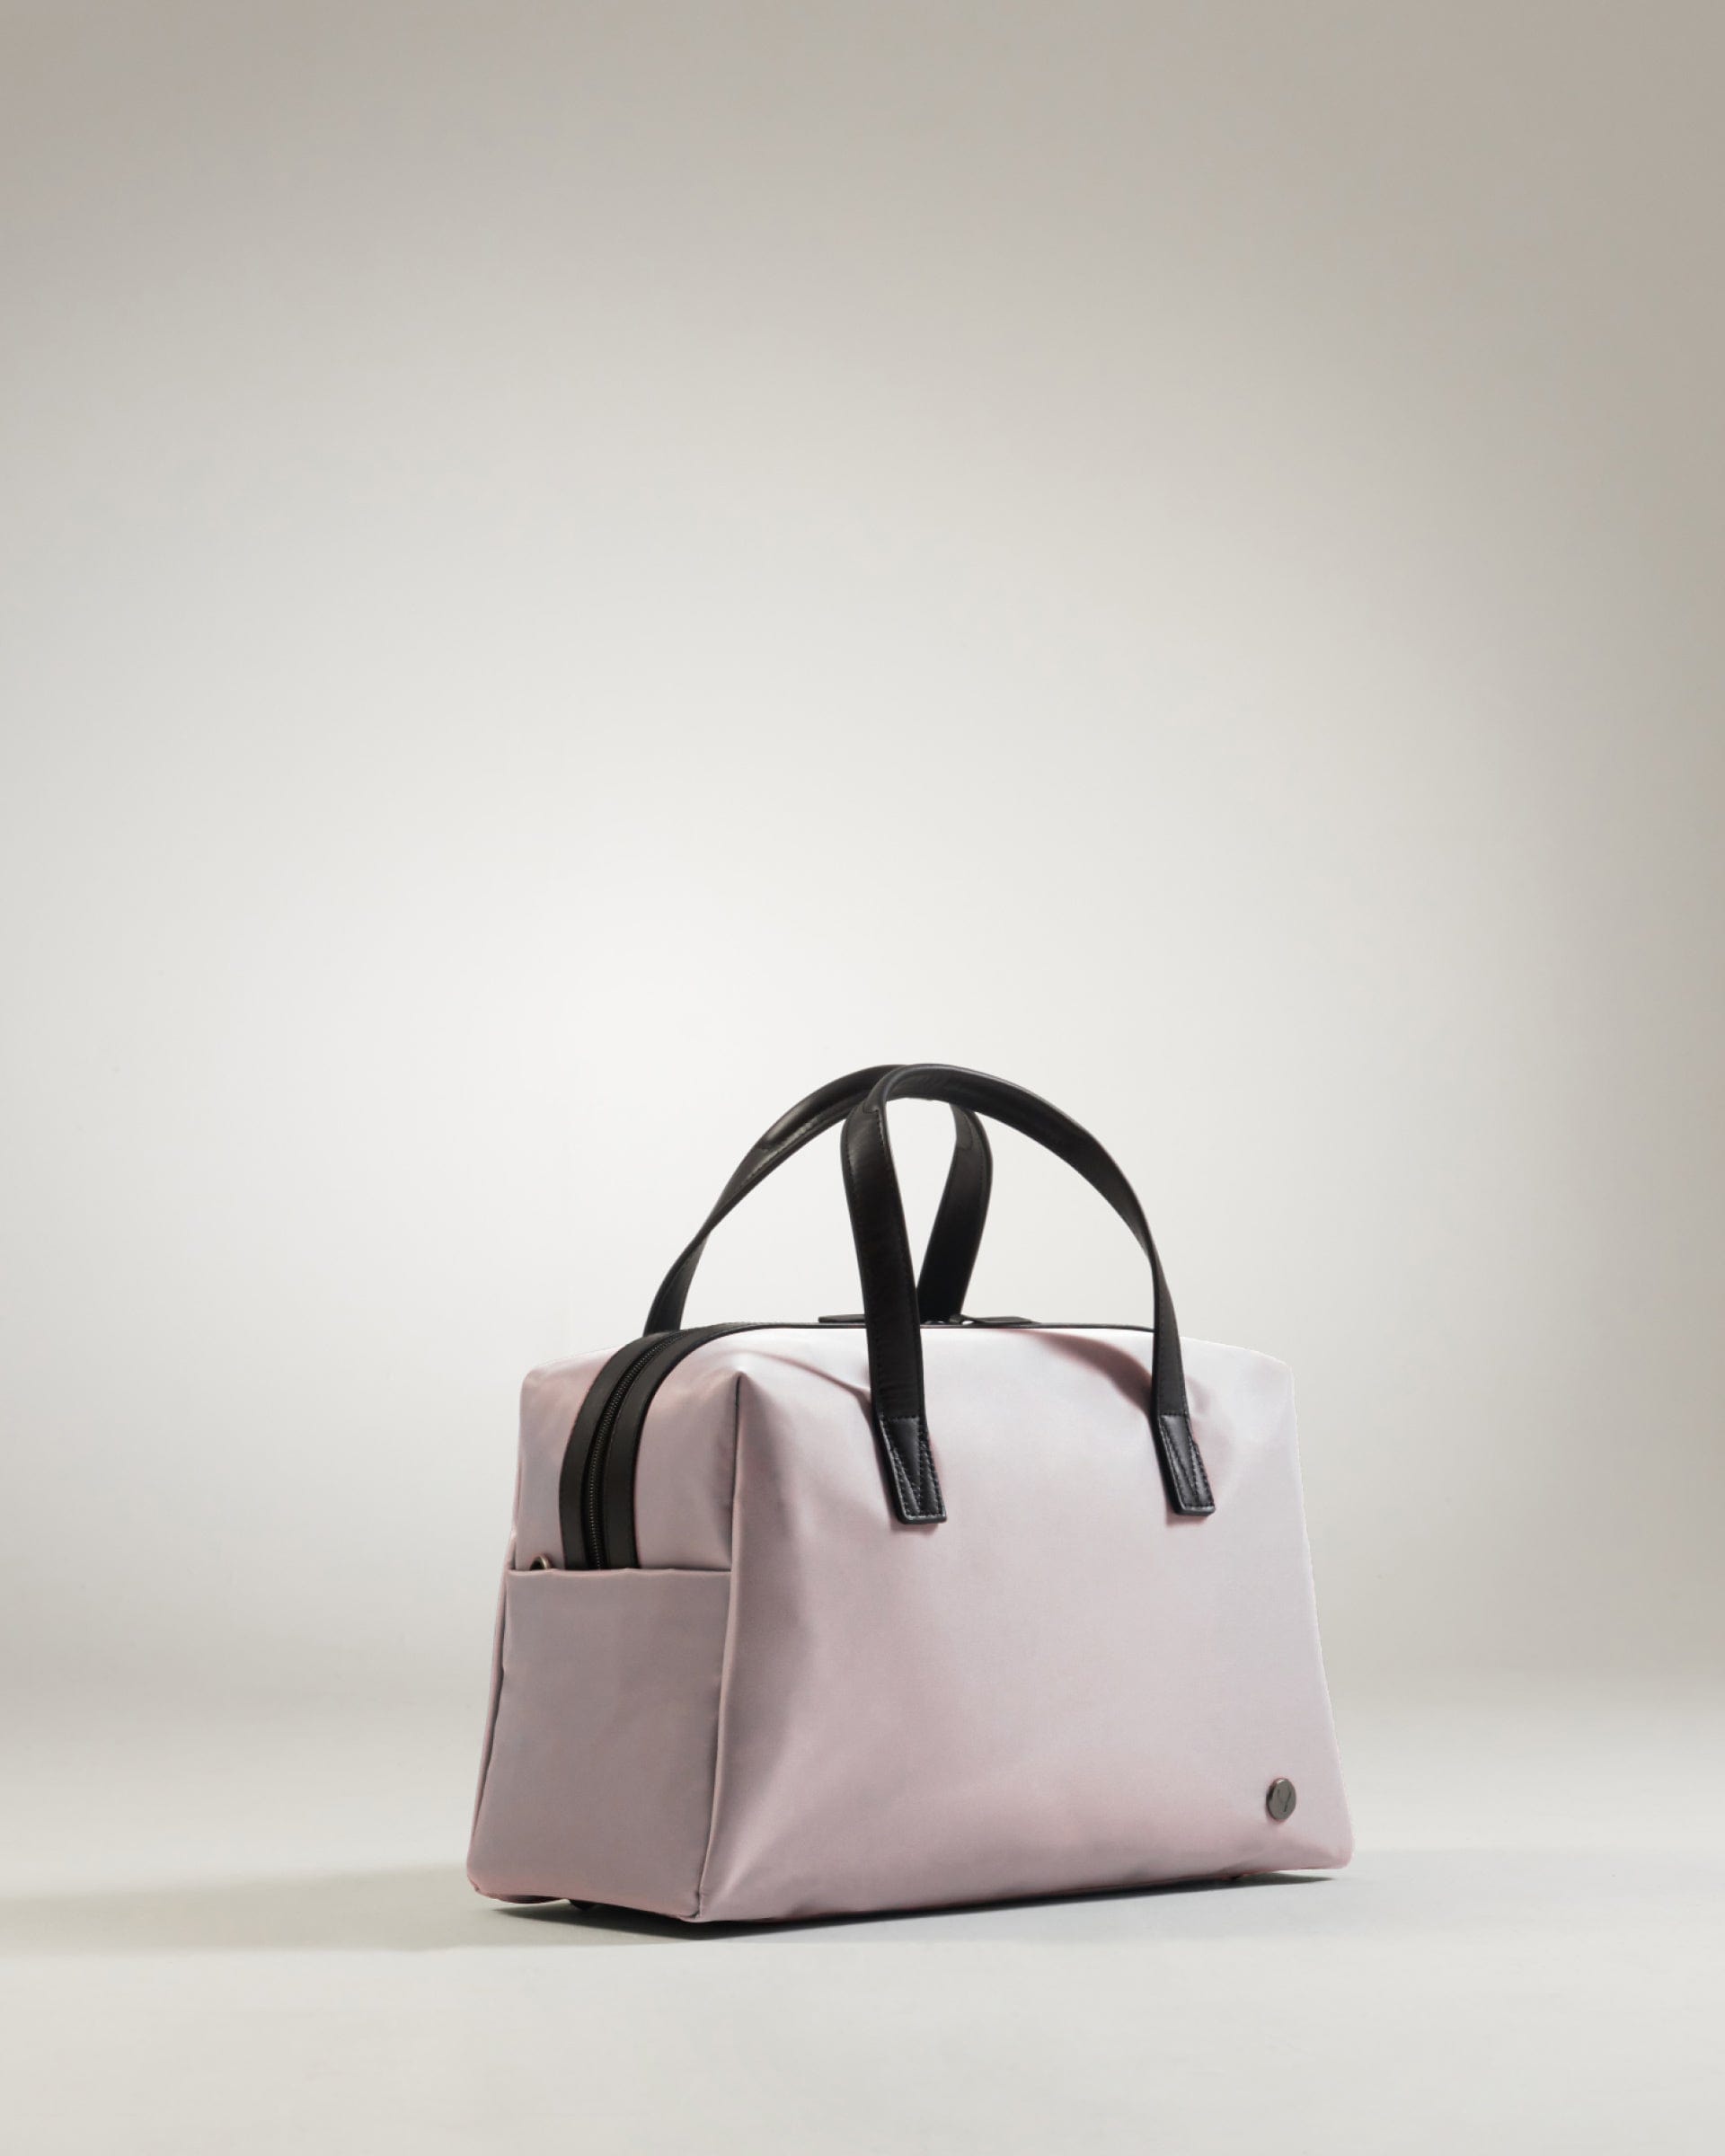 View Antler Chelsea Overnight Bag In Blush Size 415 x 26 x 18 cm information